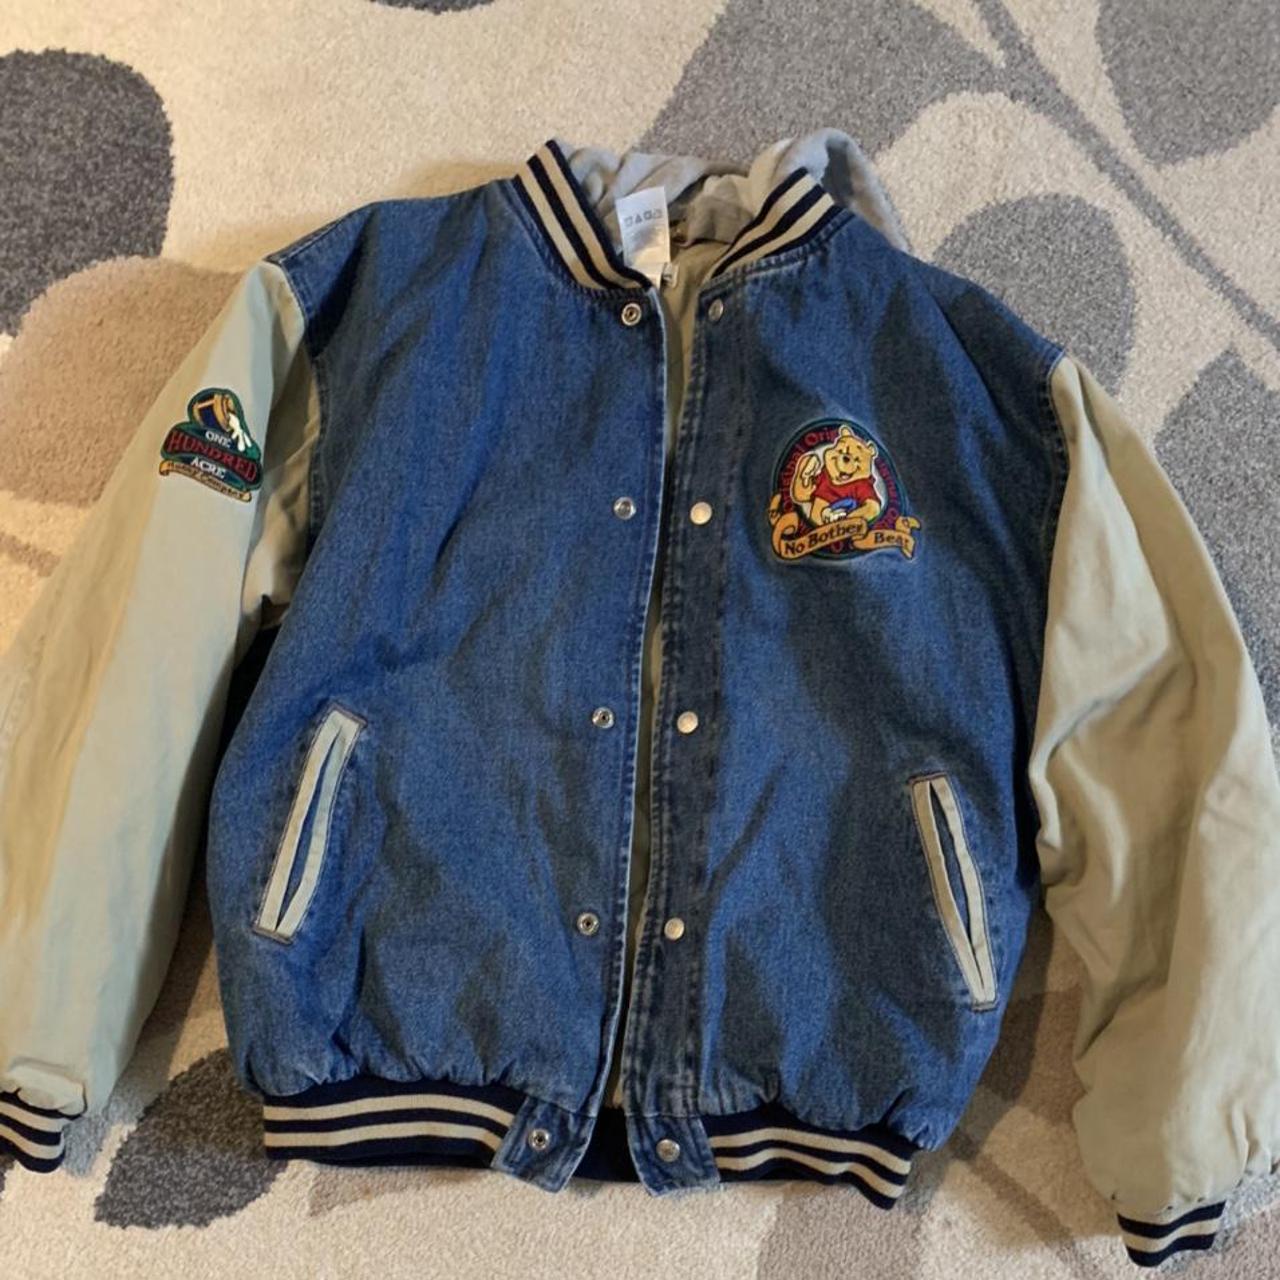 Absolute grail. Cheapest one on depop, was worn by... - Depop